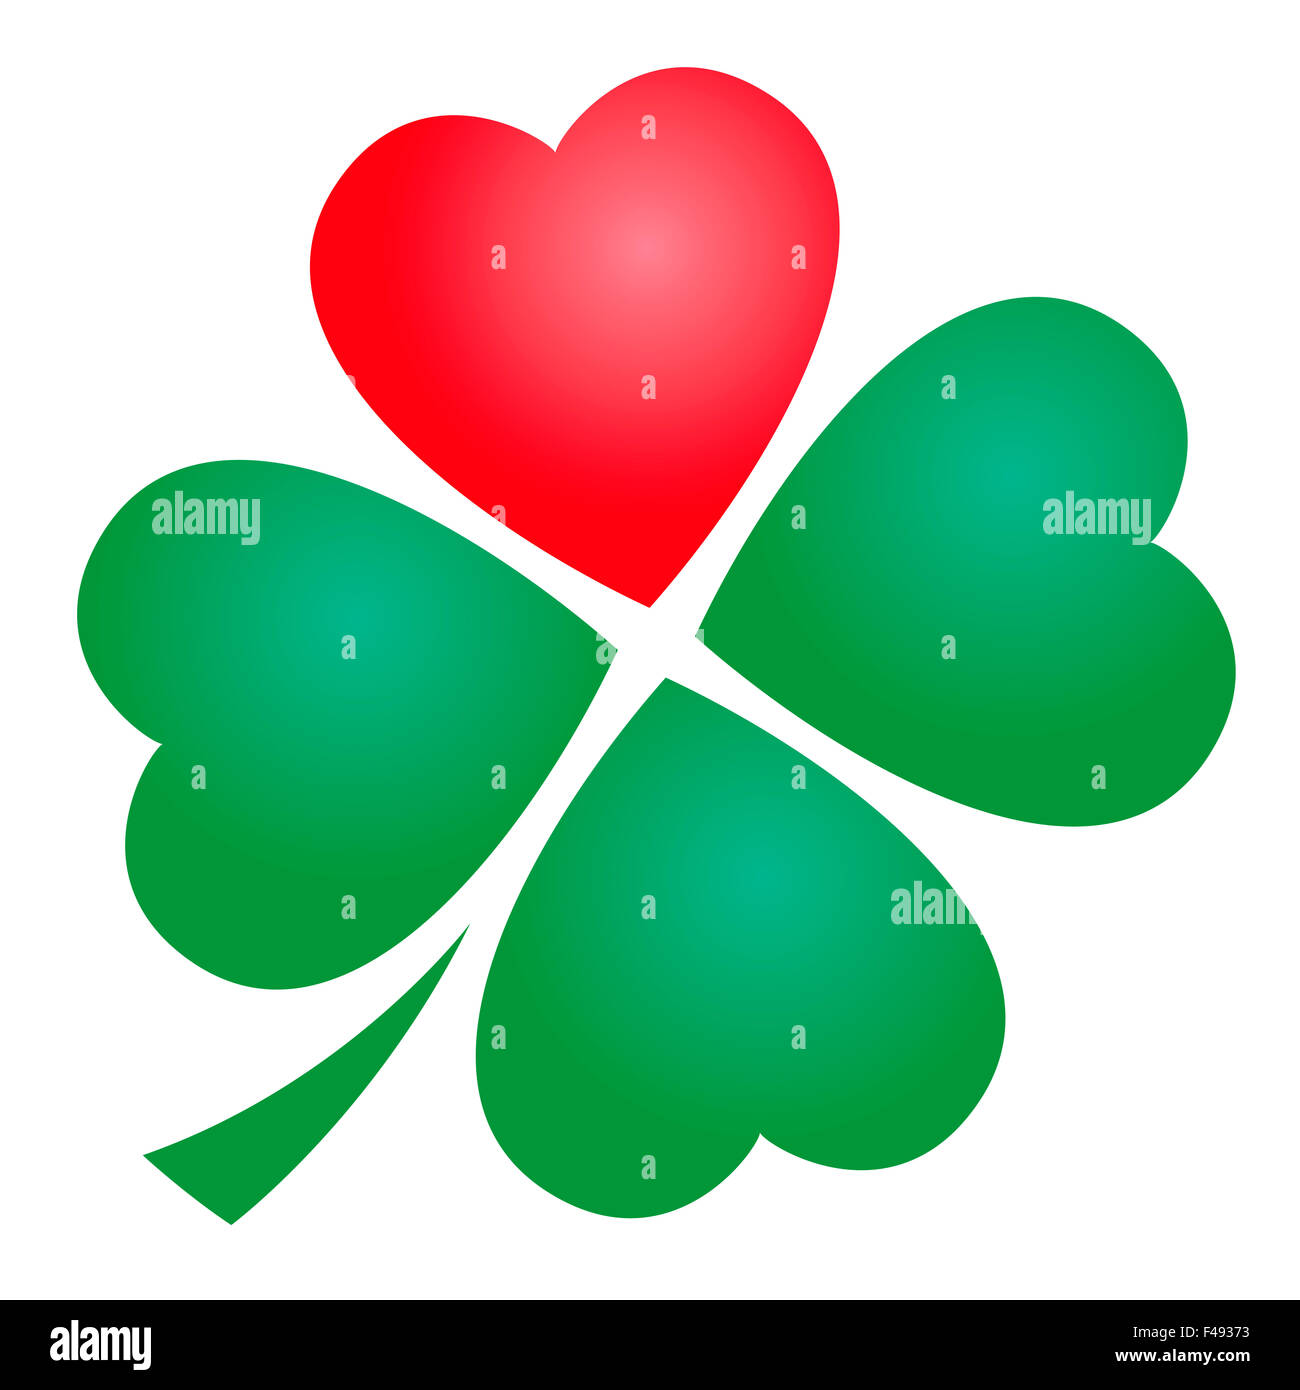 Four leaved clover with one red heart. Illustration over white background. Stock Photo